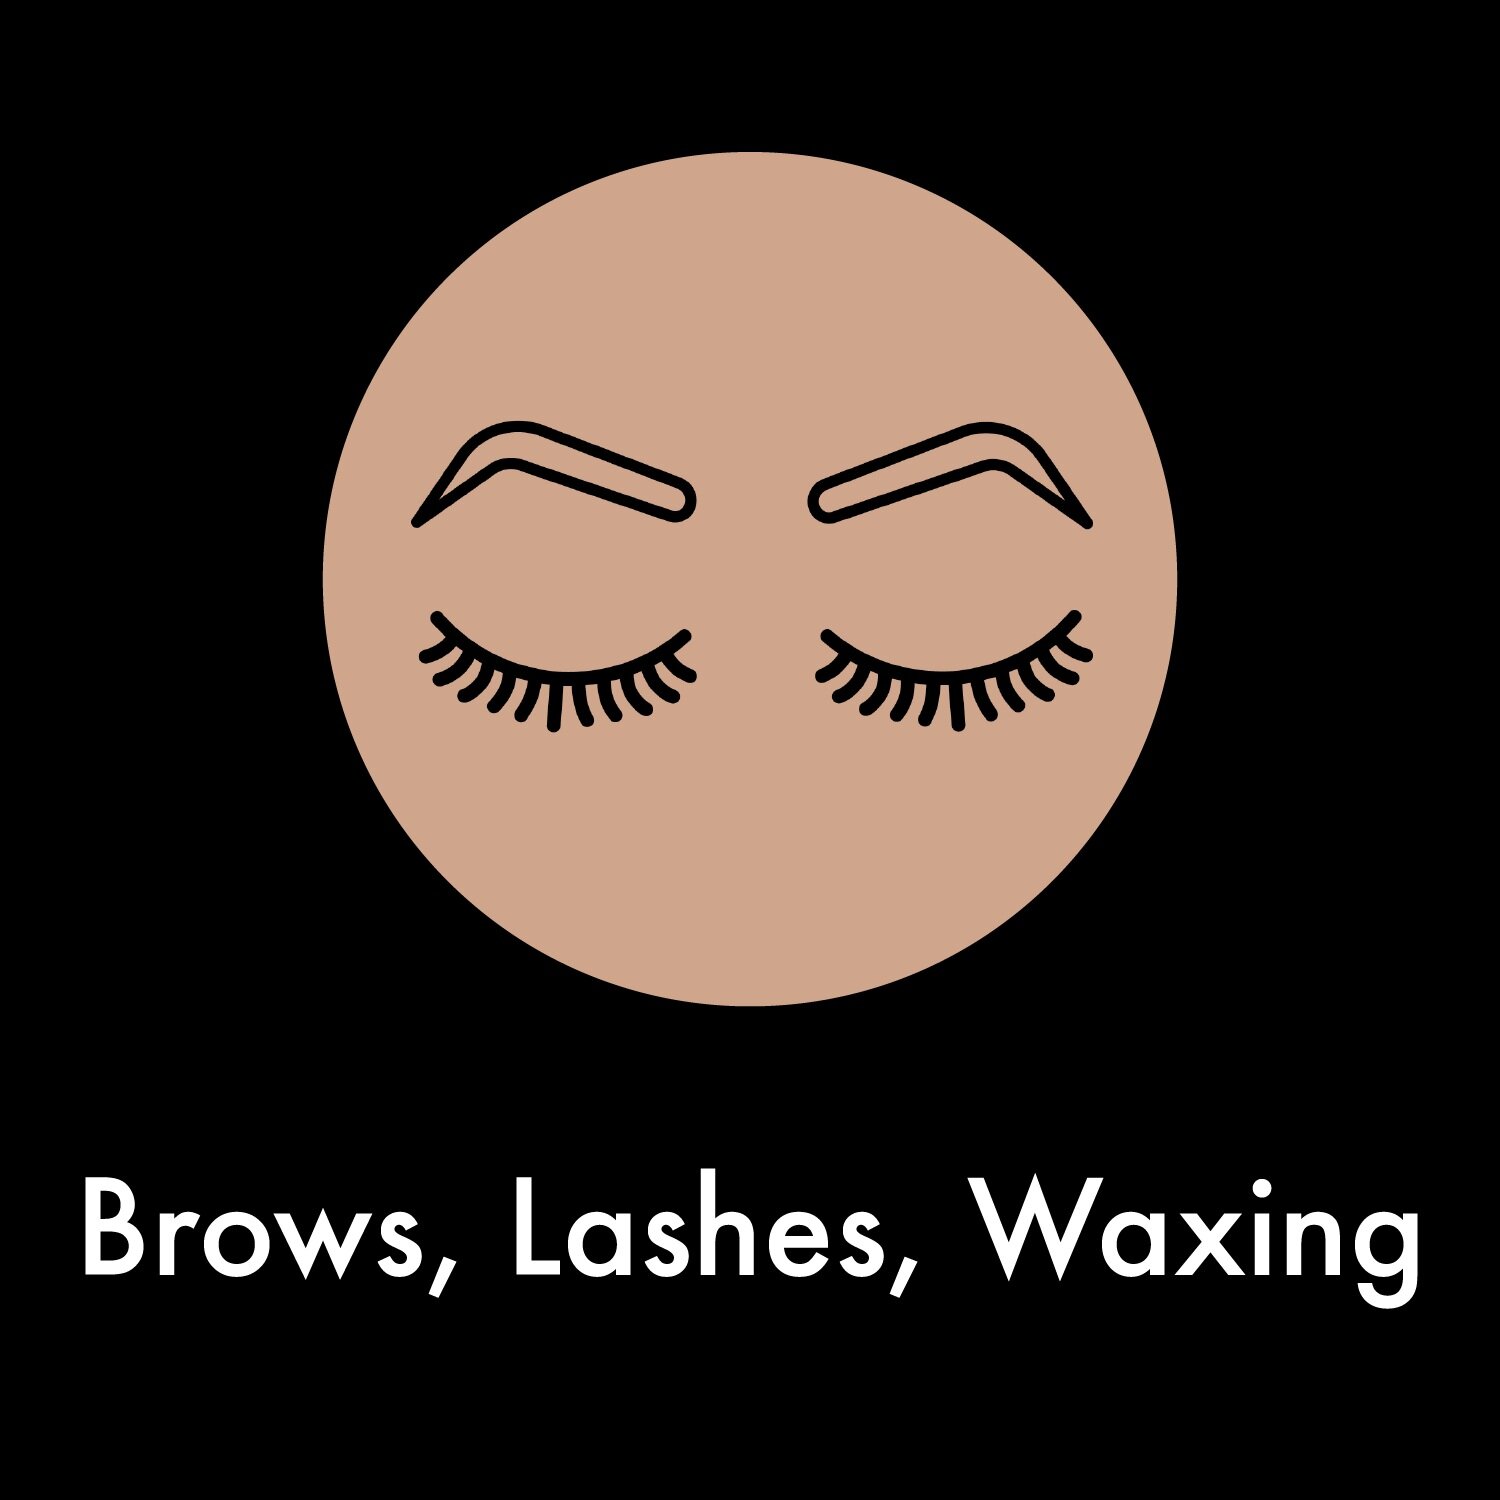 Facebar+icons_Brows+and+Lashes.jpg